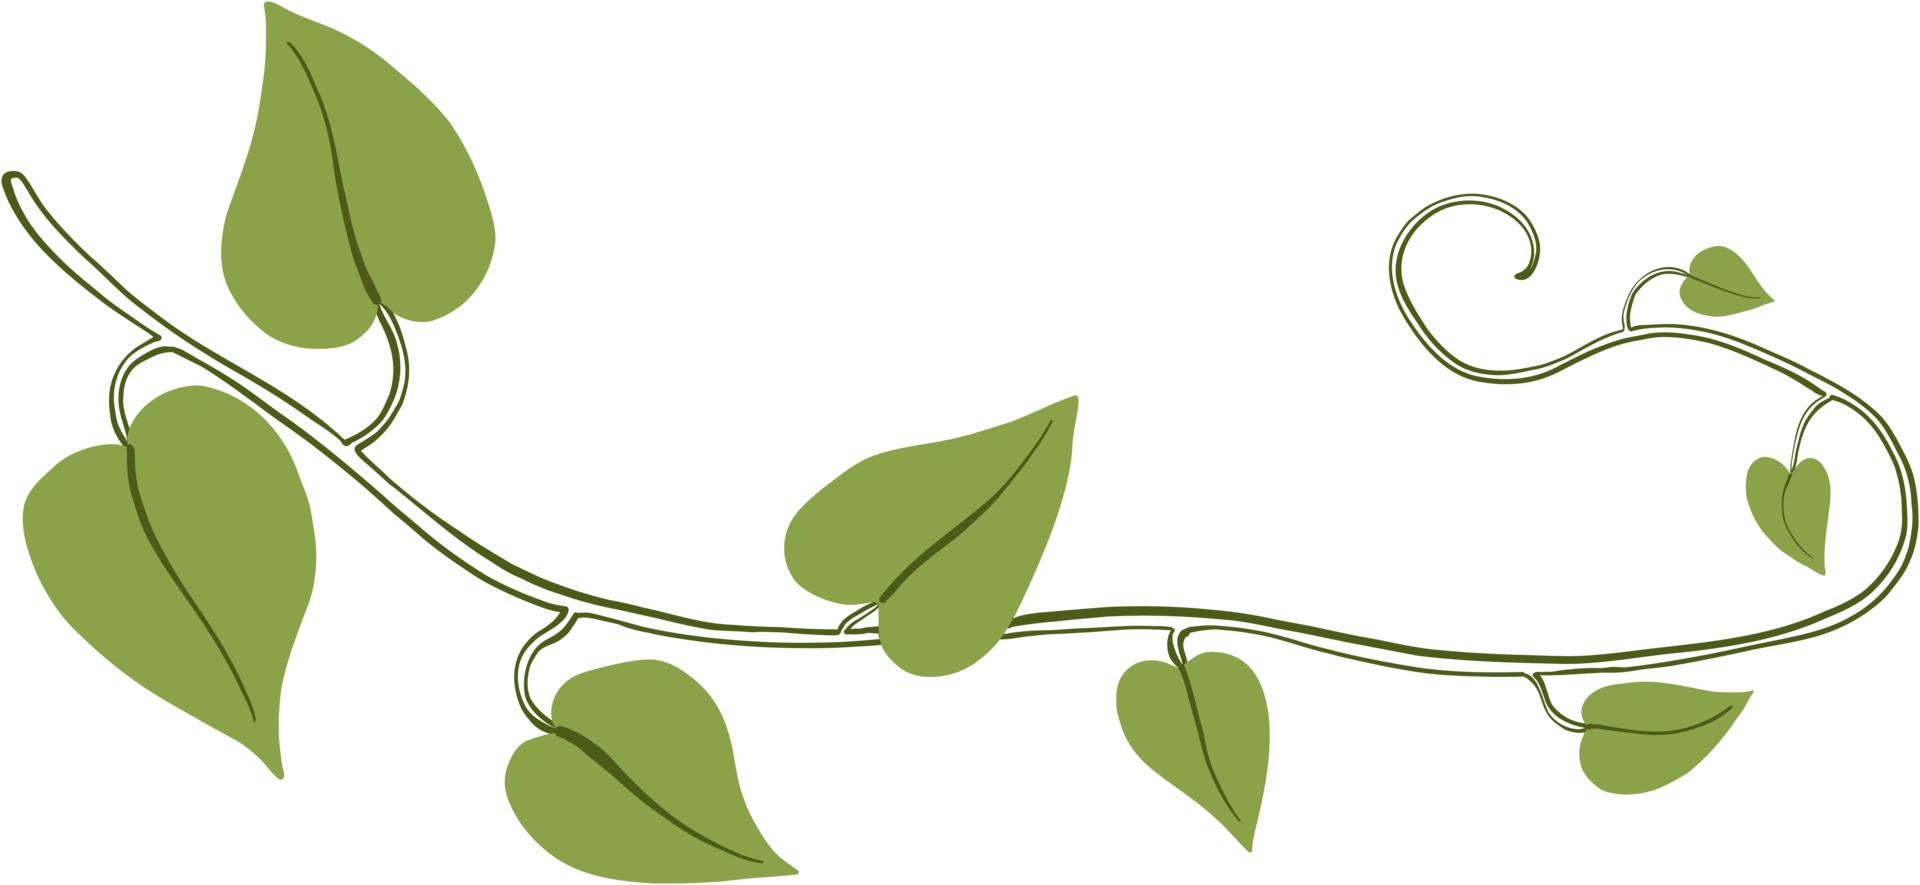 Simplicity ivy freehand drawing png